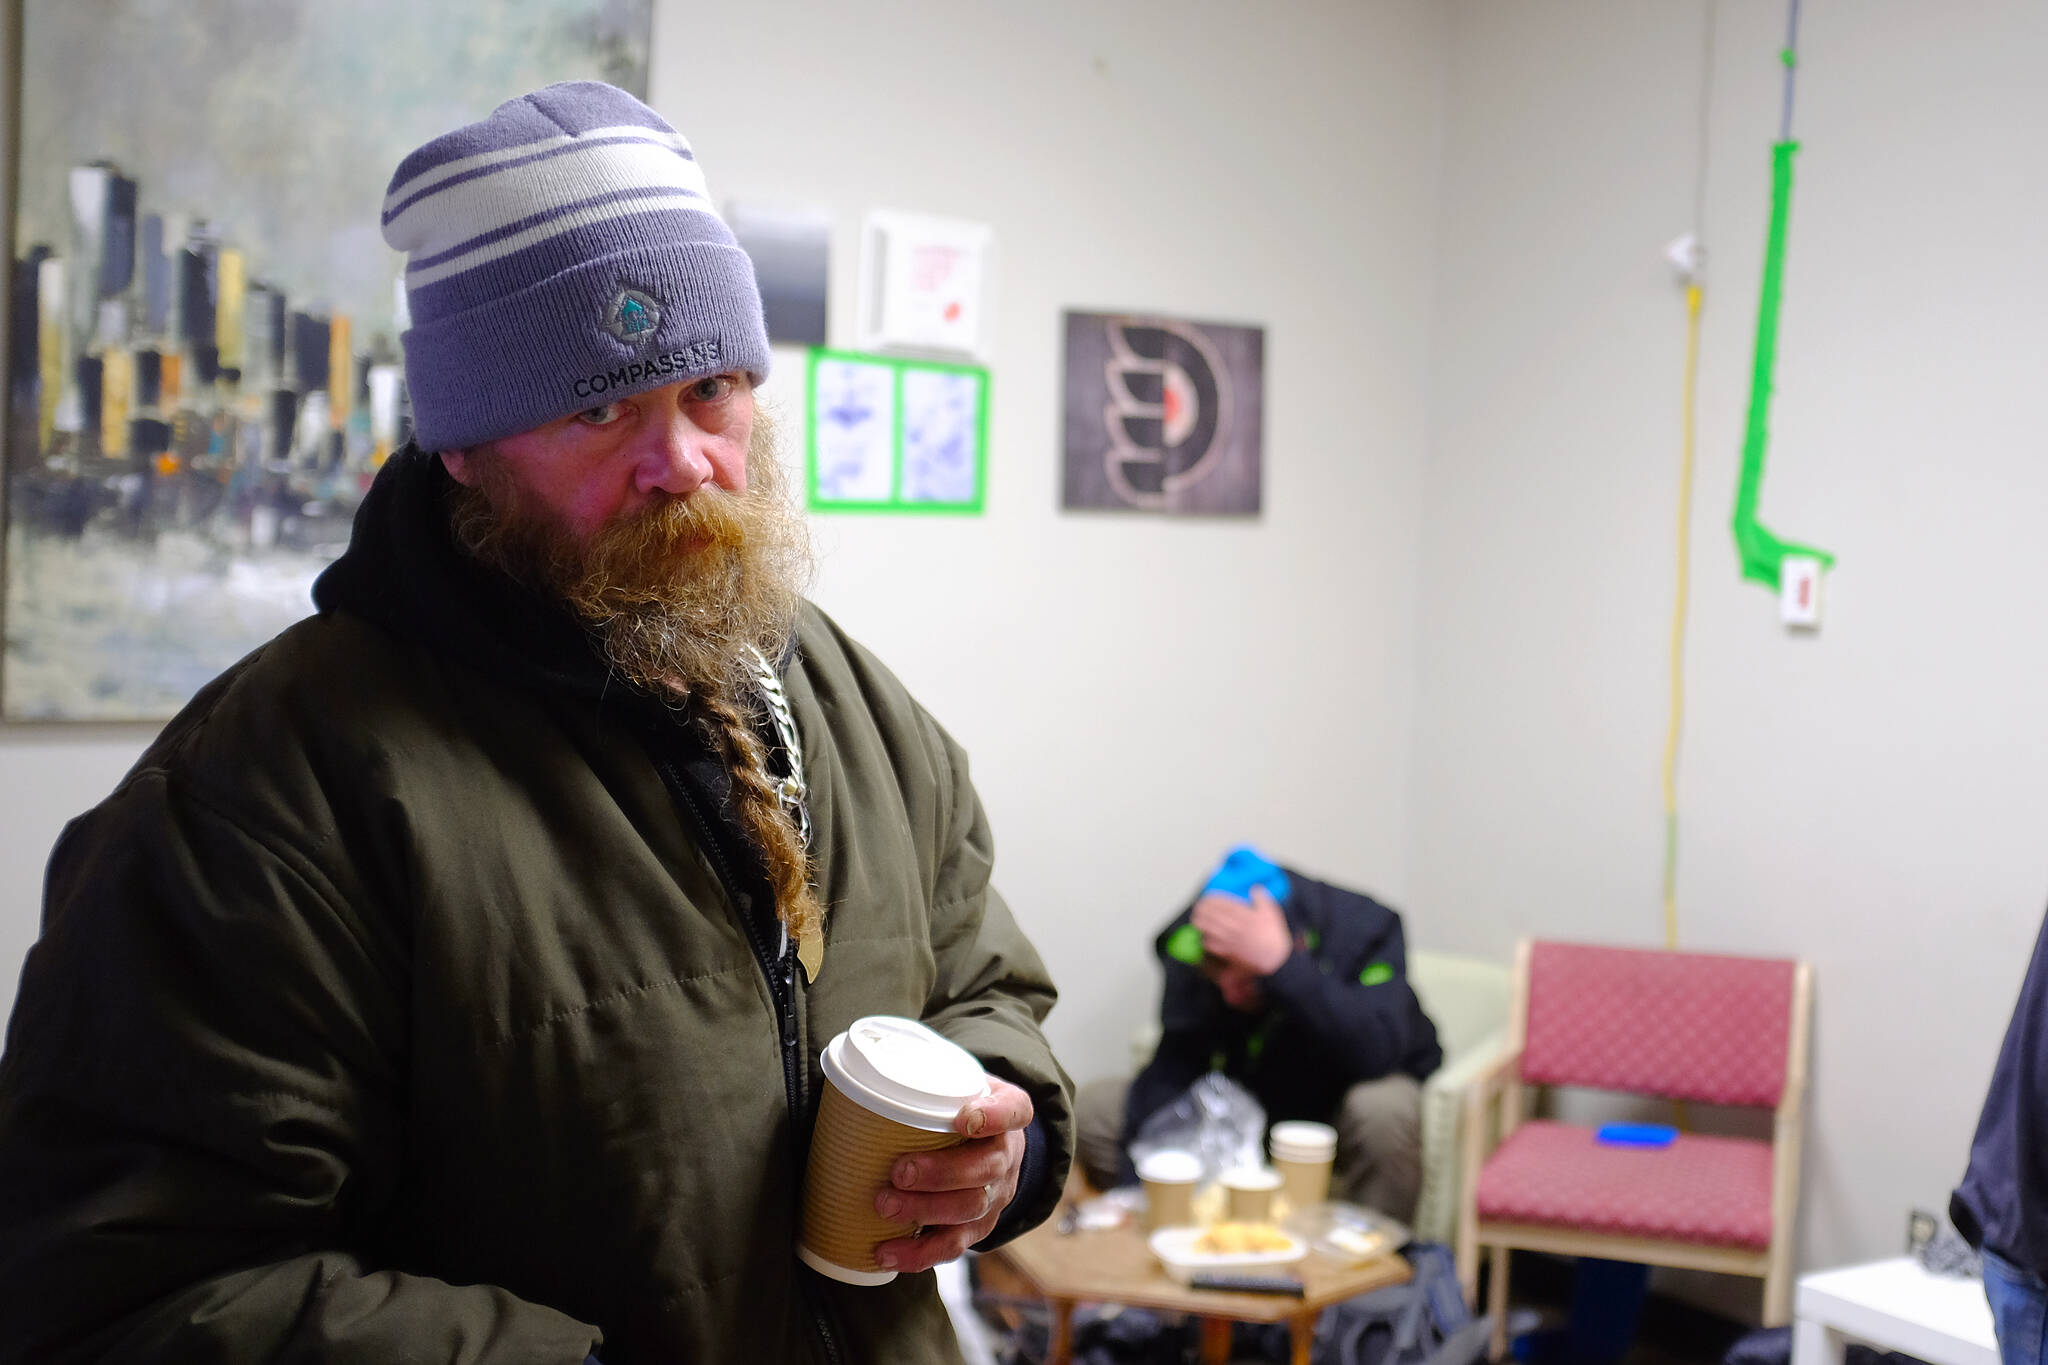 9:07 p.m. - Jack enjoys a warm cup of coffee at the Connect Centre before venturing outside for the night due to limited shelter space. (Olivier Laurin / Comox Valley Record)